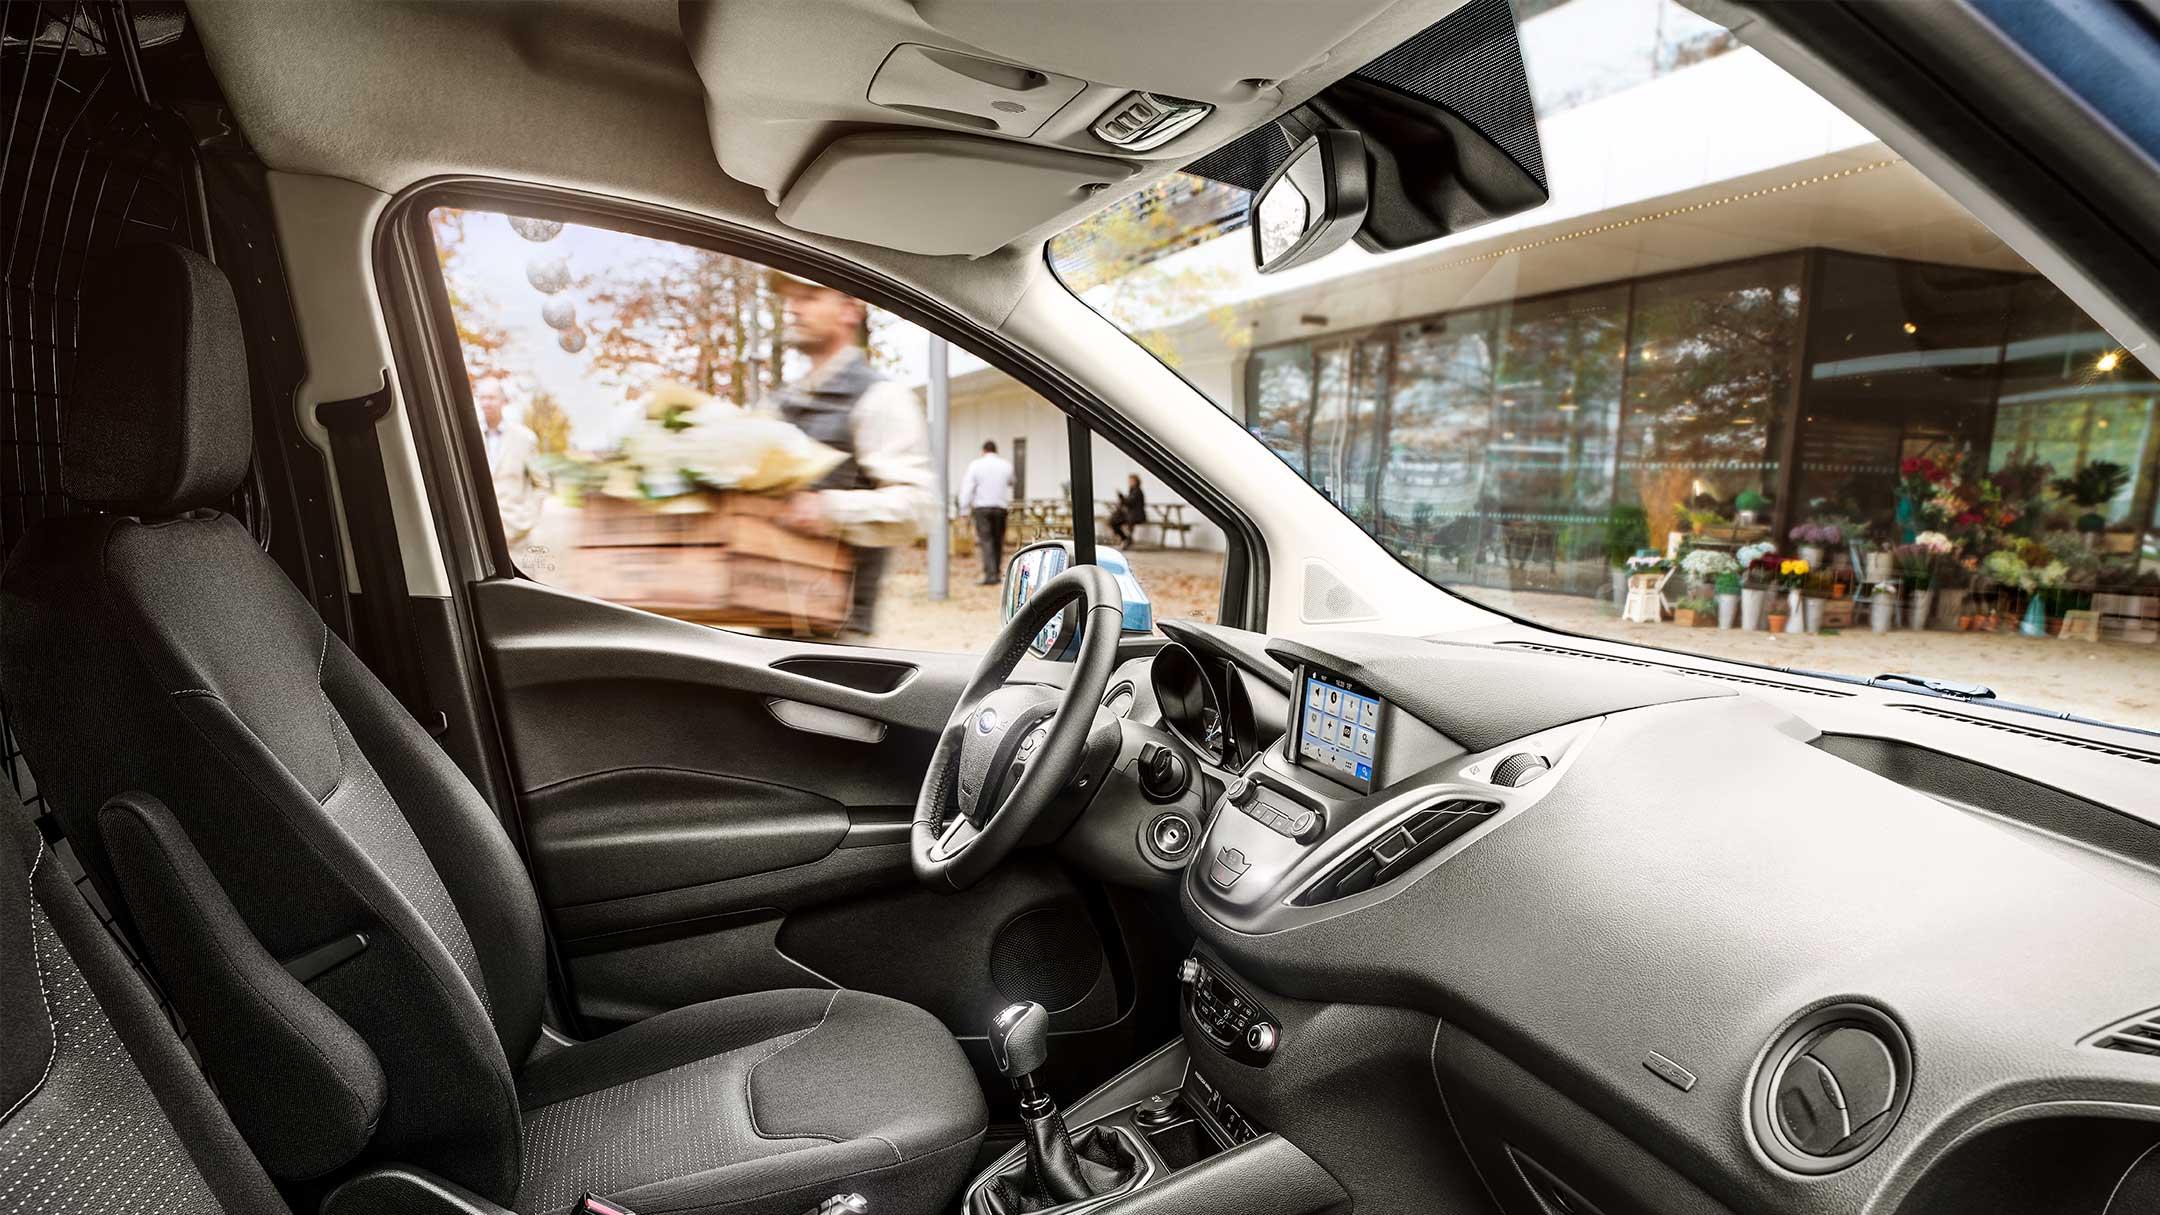 Ford Transit Courier front interior